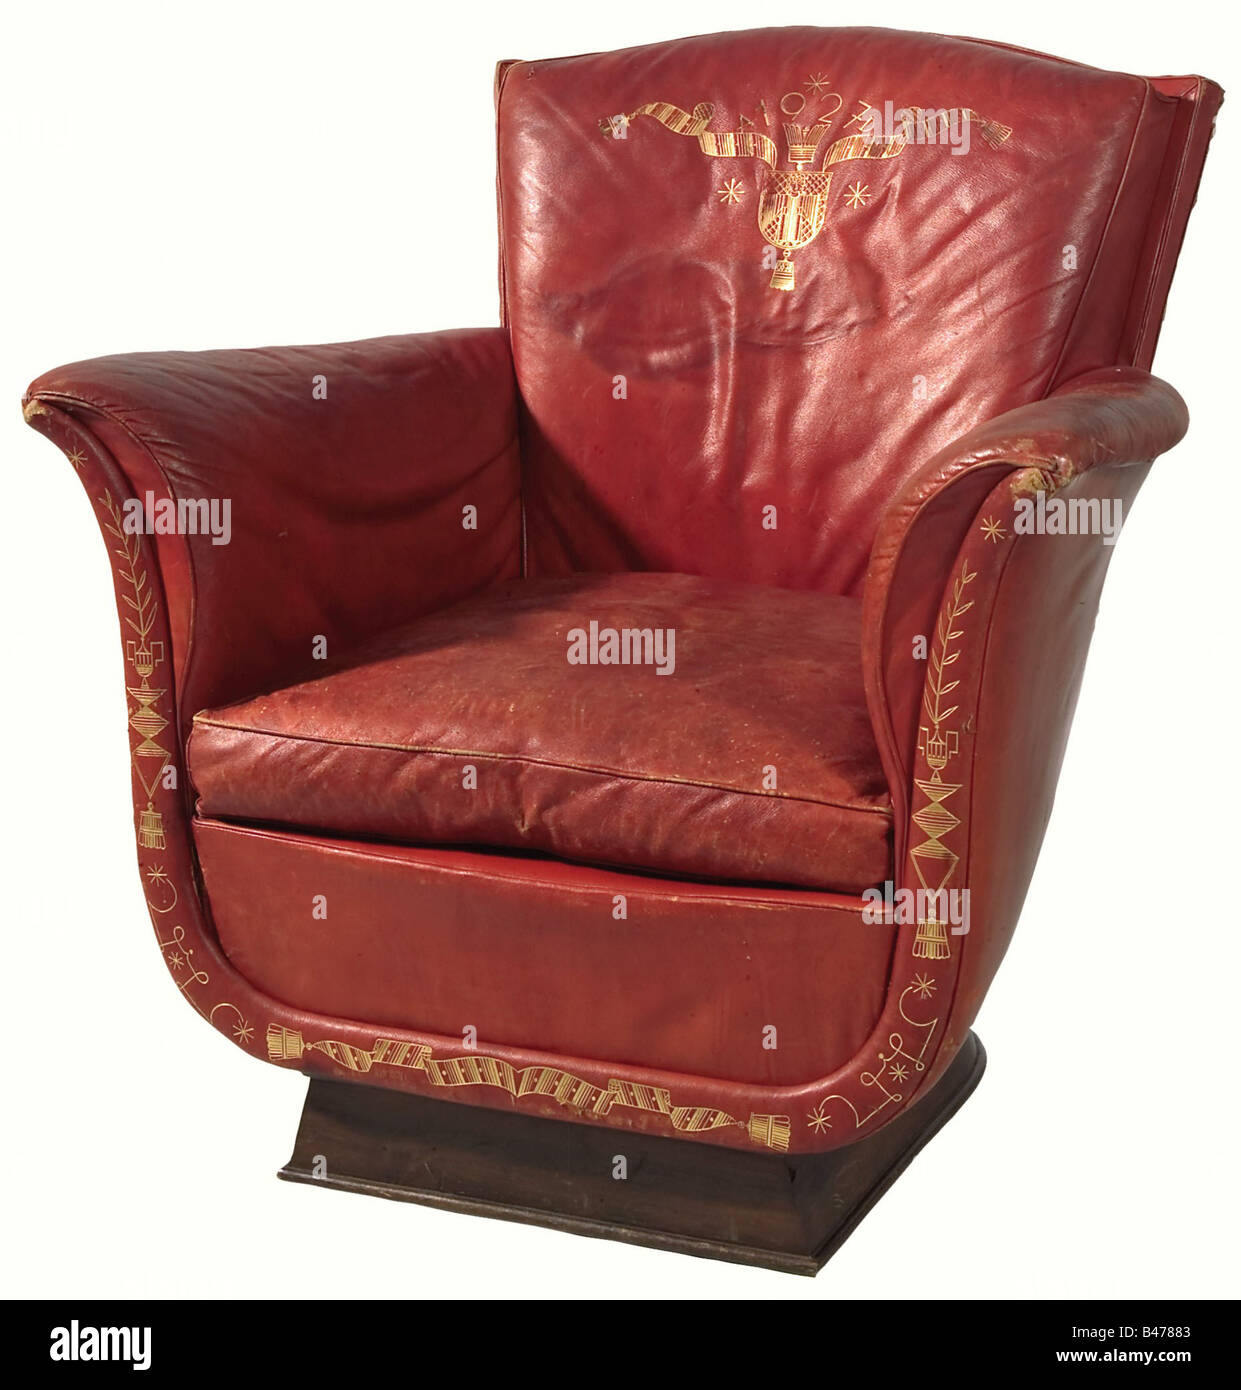 Pope Pius XII - a presentation arm chair from Prince Alfons of Bavaria, for the 1926/27 New Year to HE Msgr. Dr. Eugen Pacelli, Archbishop of Sardes and Papal Nuncio in Berlin. Red Morocco leather stamped in gold. The Munich coat of arms is on the back with a waving scrol historic, historical, 1920s, 20th century, fine arts, art, art object, art objects, artful, precious, collectible, collector's item, collectibles, collector's items, rarity, rarities, Stock Photo